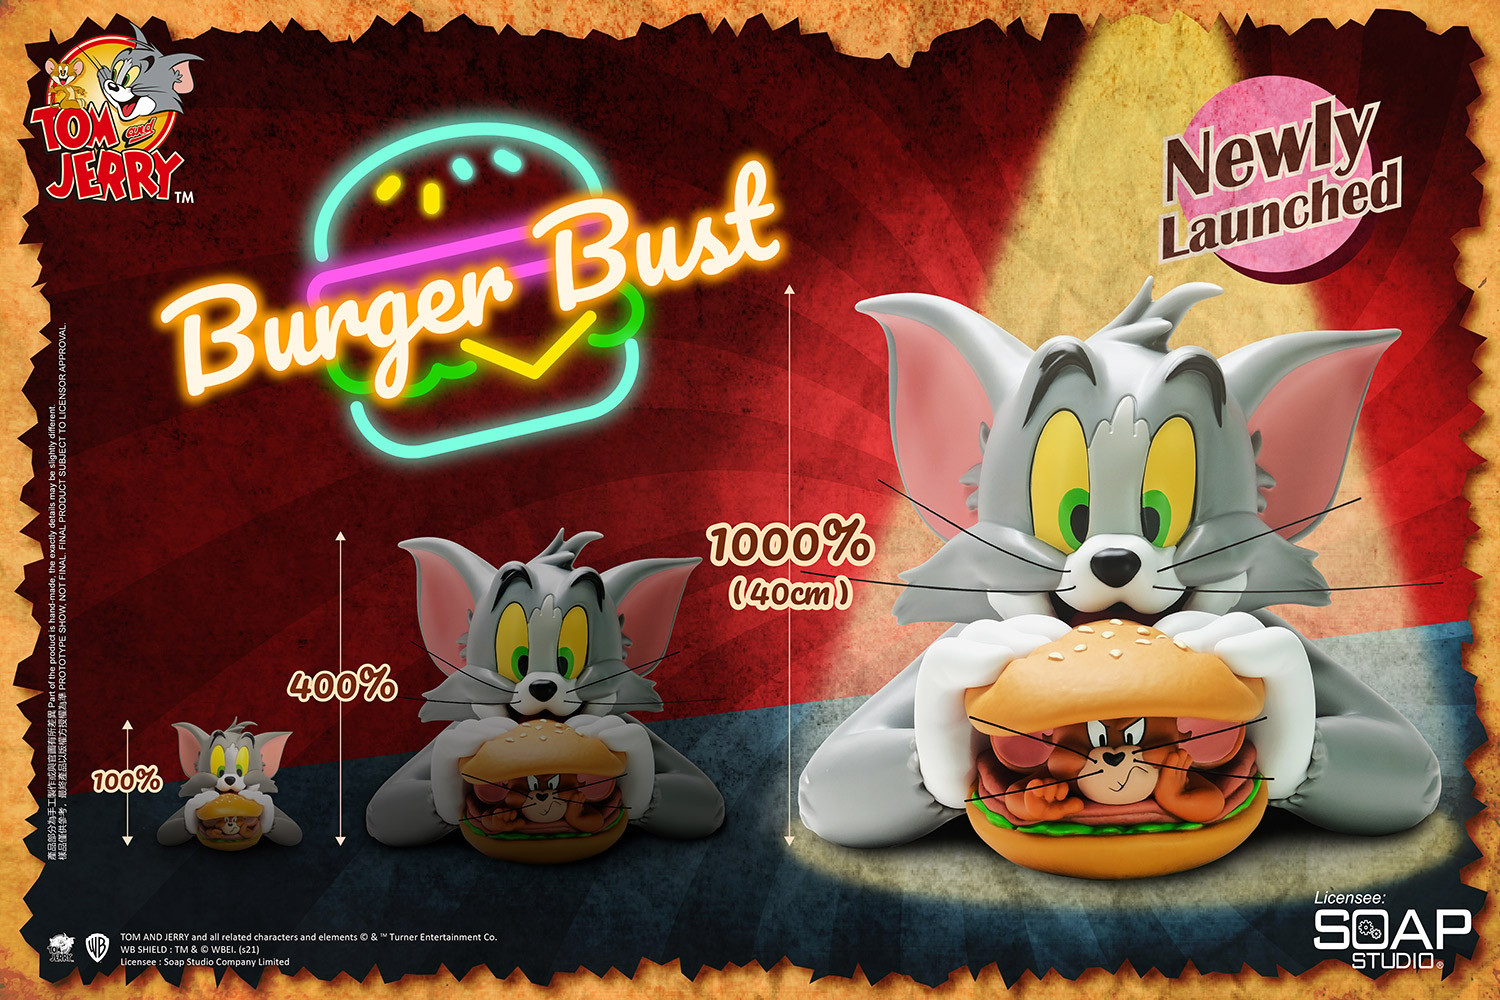 Tom and Jerry Mega Burger (Prototype Shown) View 1